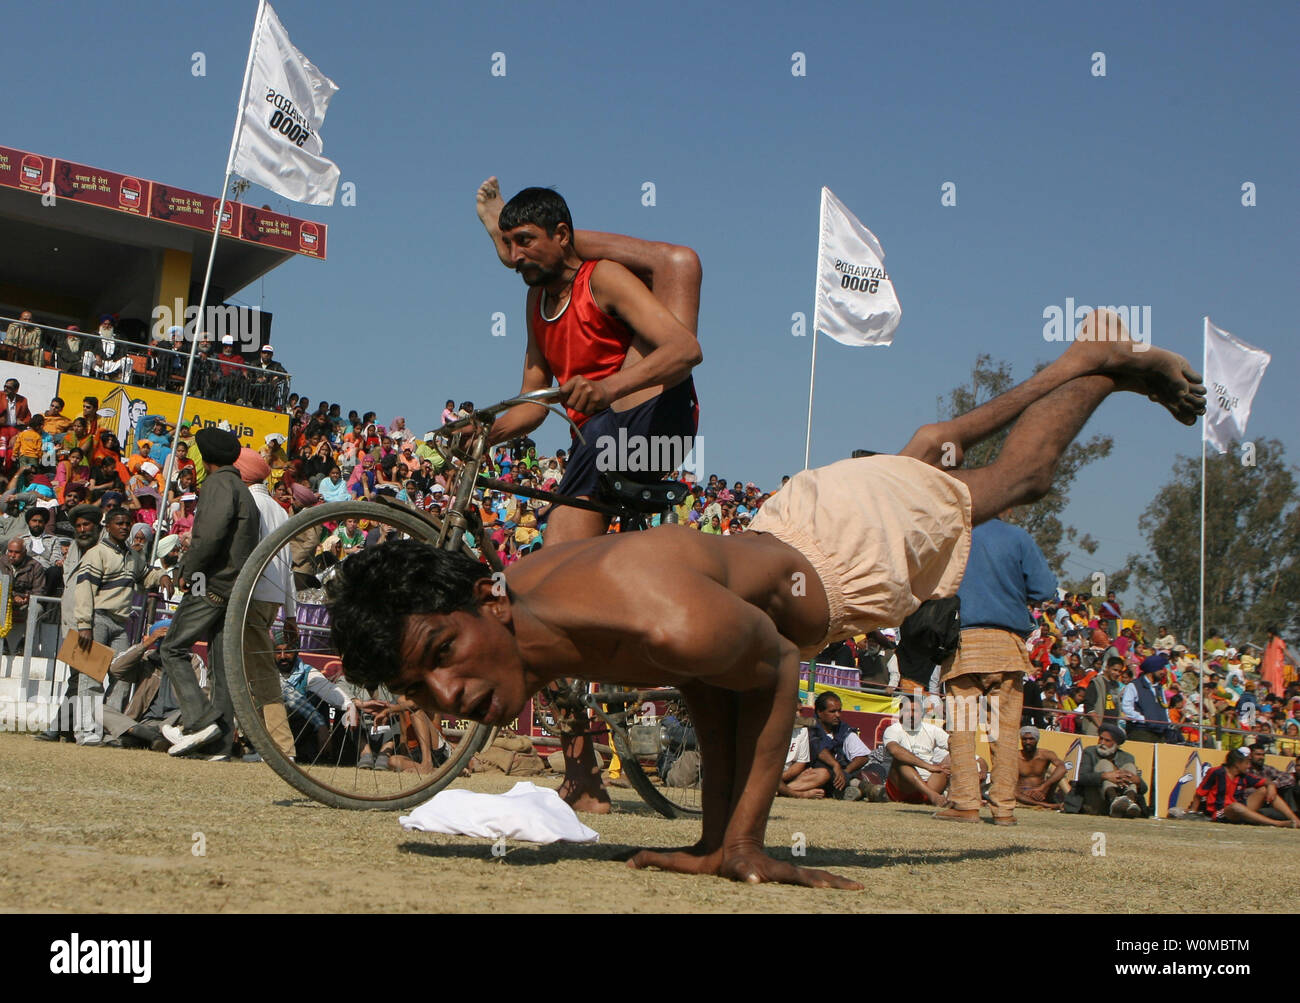 Indian handicapped villagers show their talents during the Kila Raipur Sports festival, also known as the Rural Olympics near Ludhiana, February 9, 2008. The games started in 1933 and take place over a three-day period during which competitors enter various rural sports events including equestrian events, bullock cart races and shows of strength.  (UPI Photo) Stock Photo